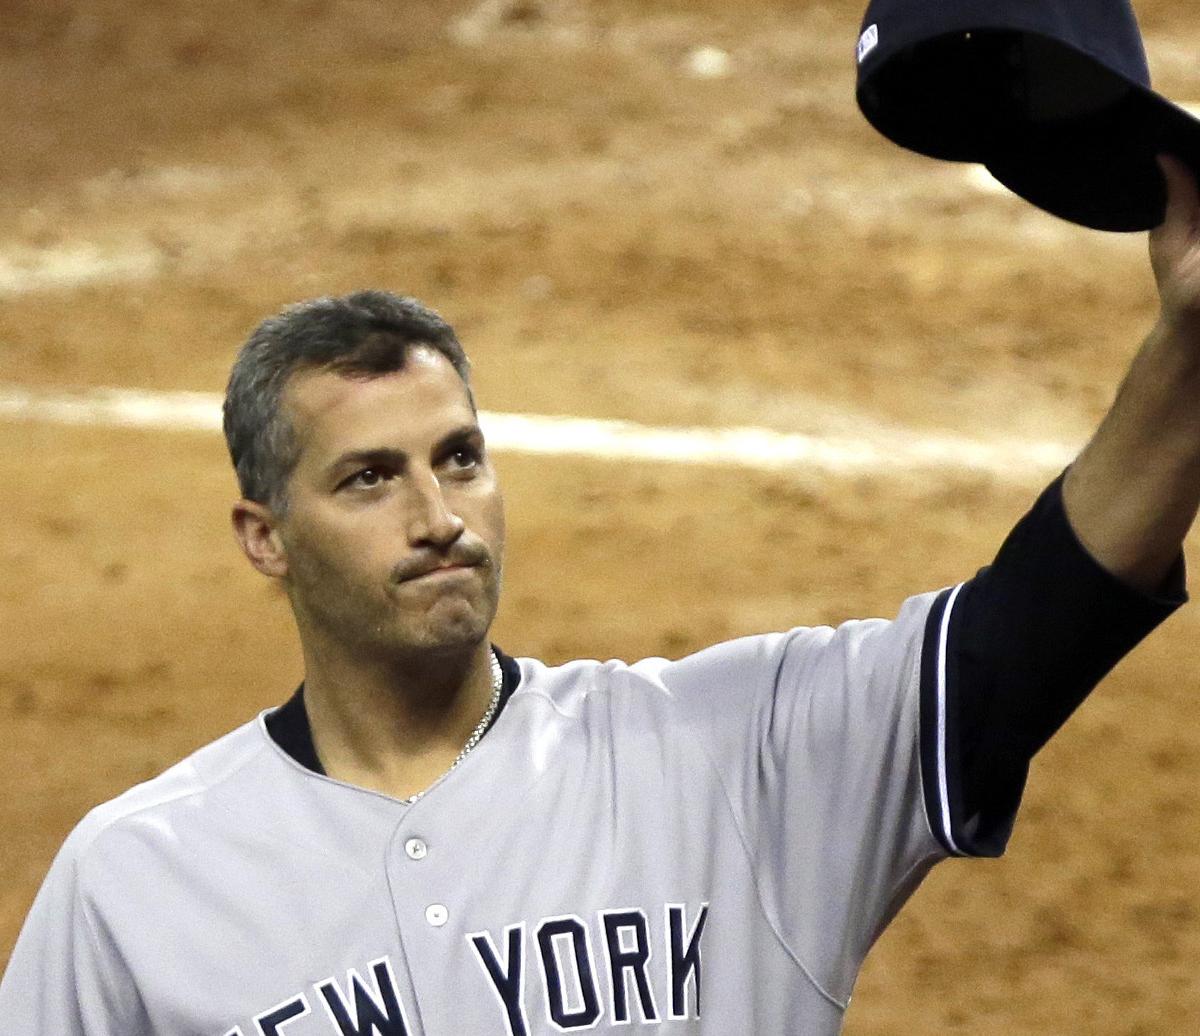 The New York Yankees Could Run Out of Jersey Numbers After